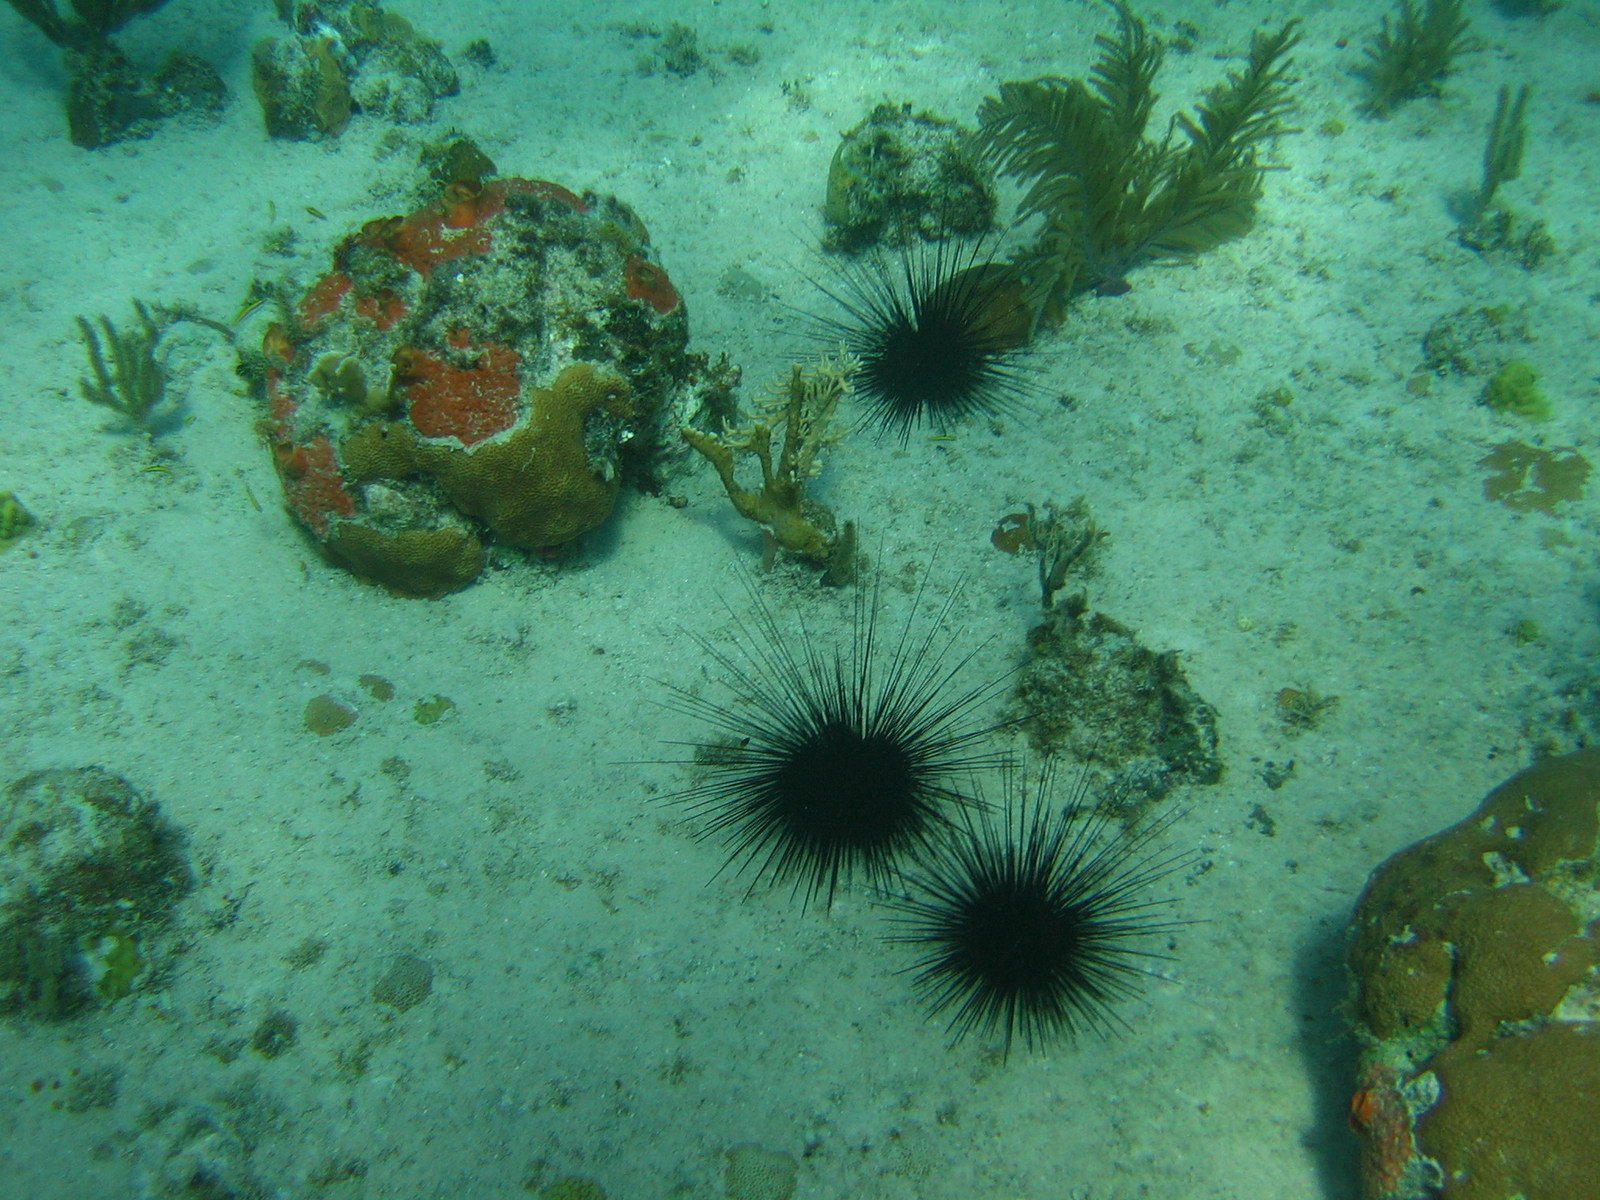 two sea urchins in shallow water among other ocean life